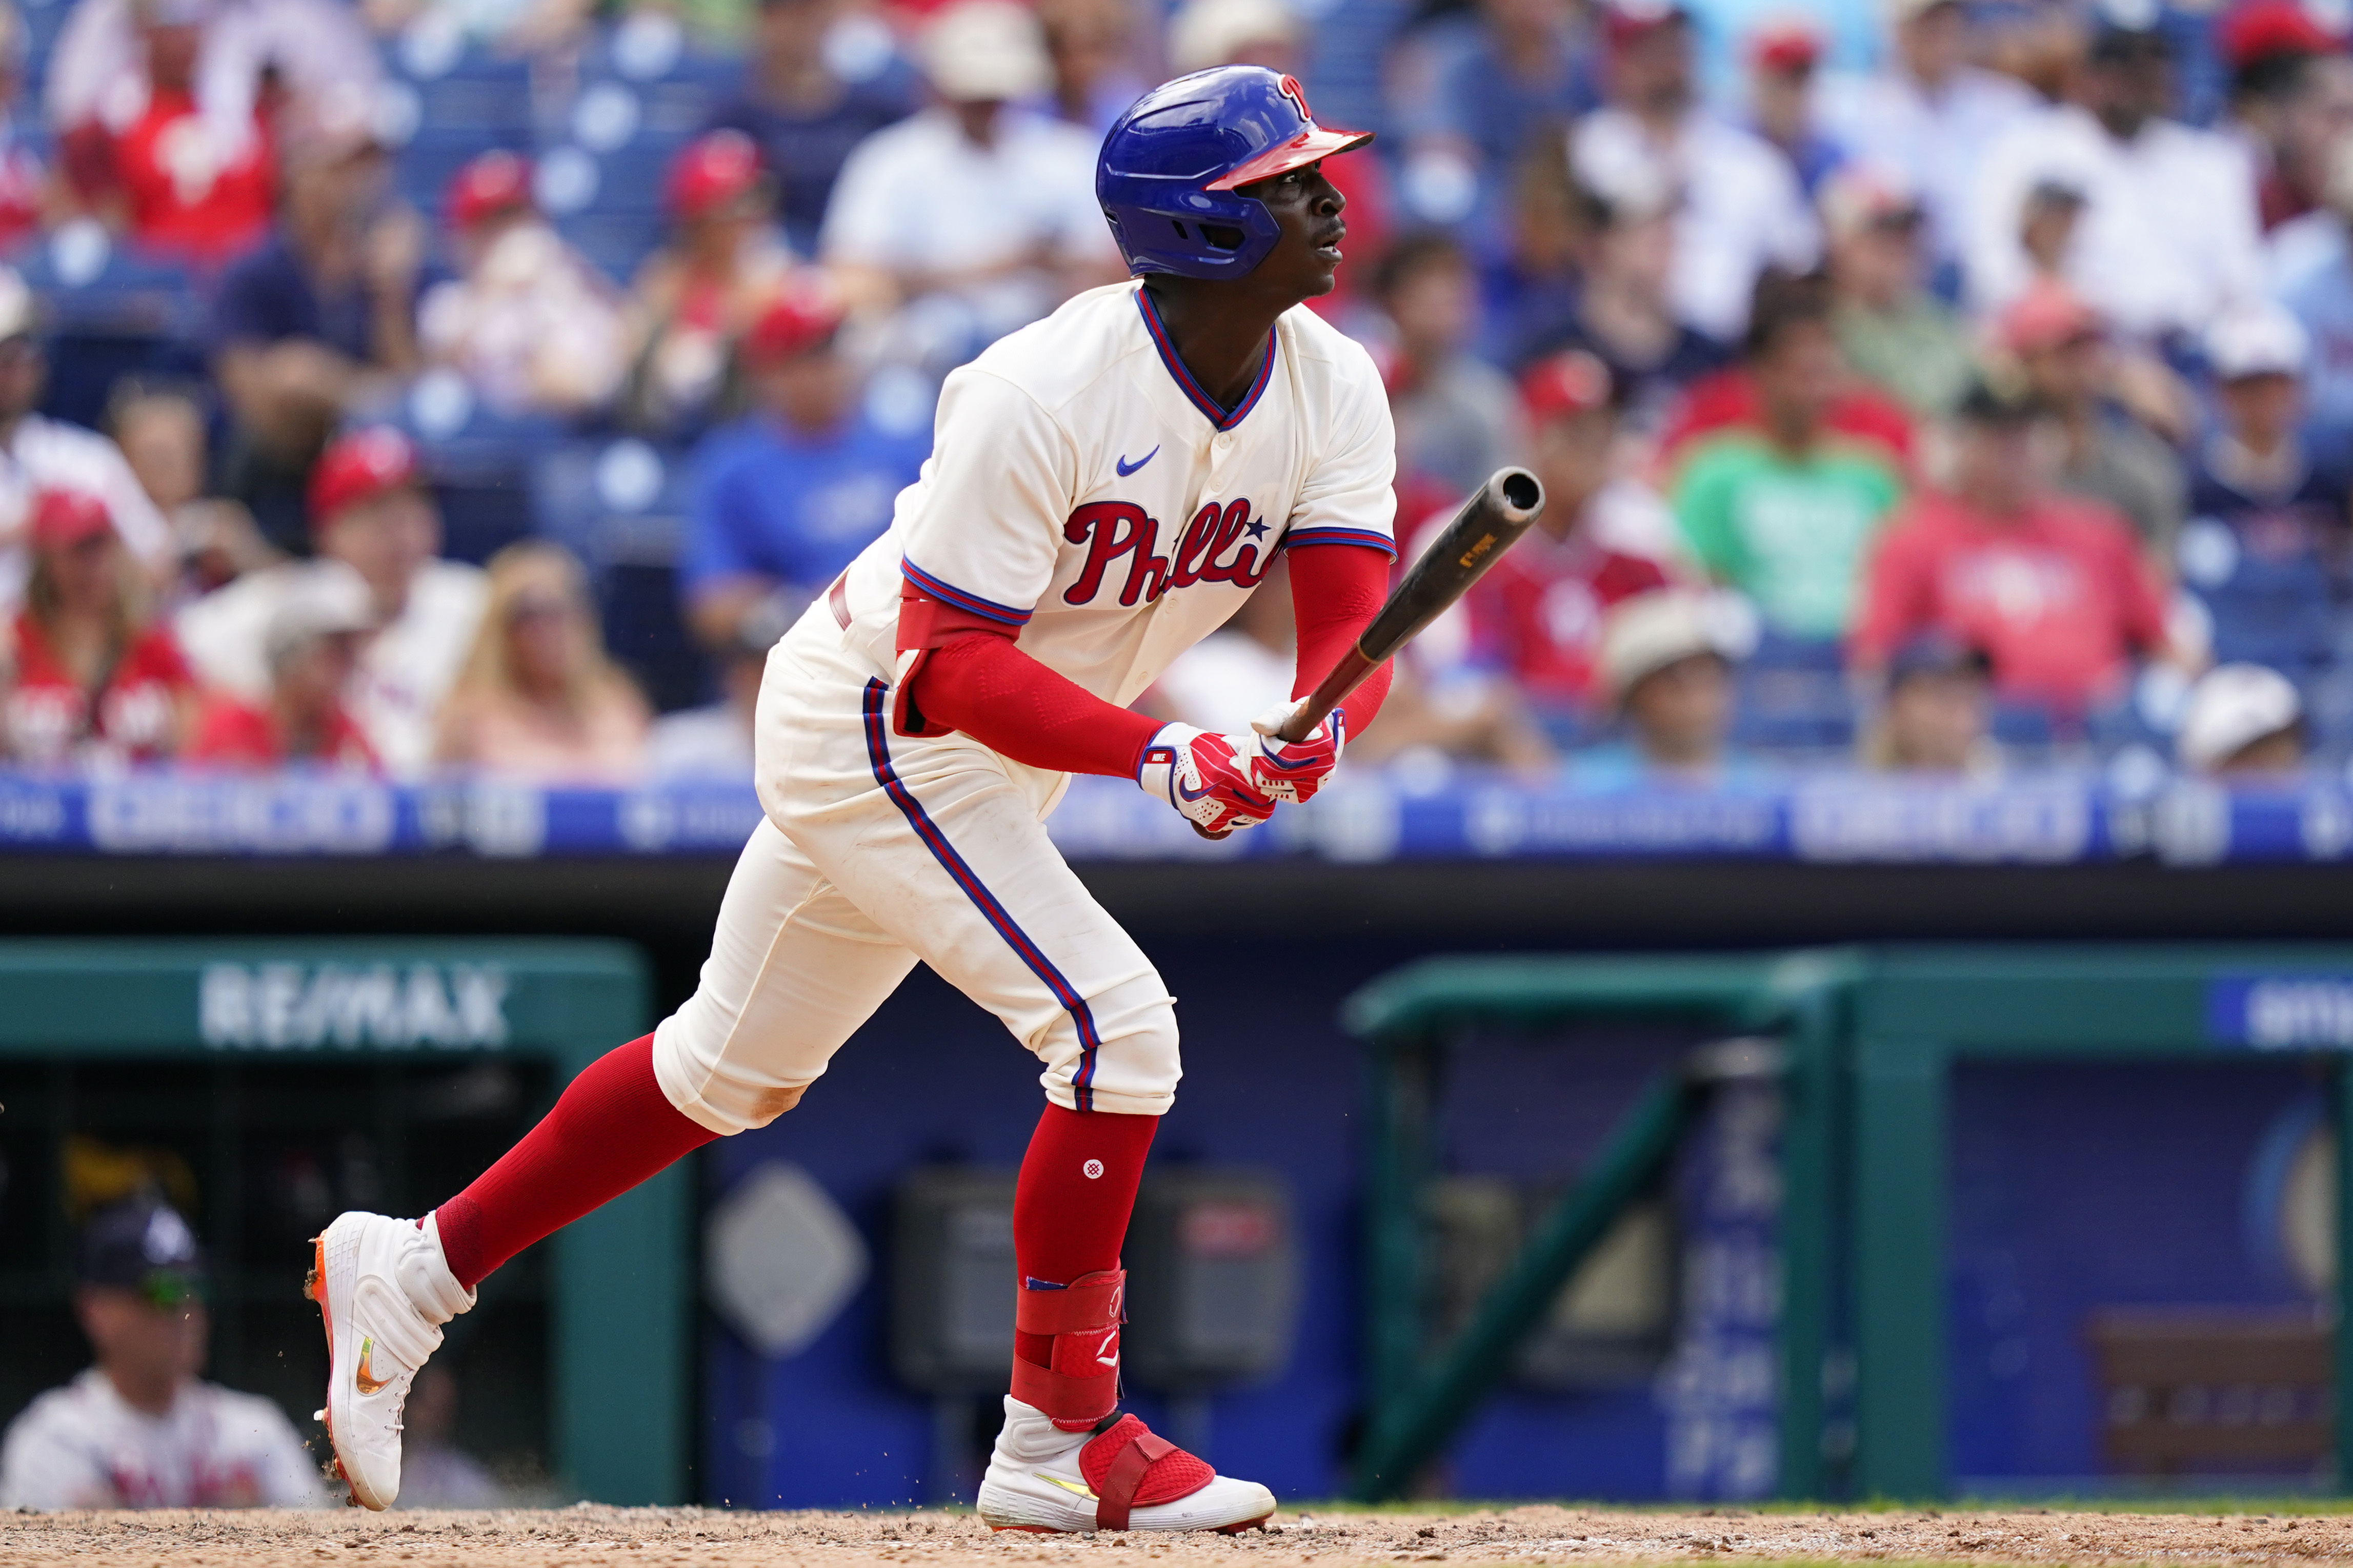 Didi Gregorius continues to make case that he is one of the best